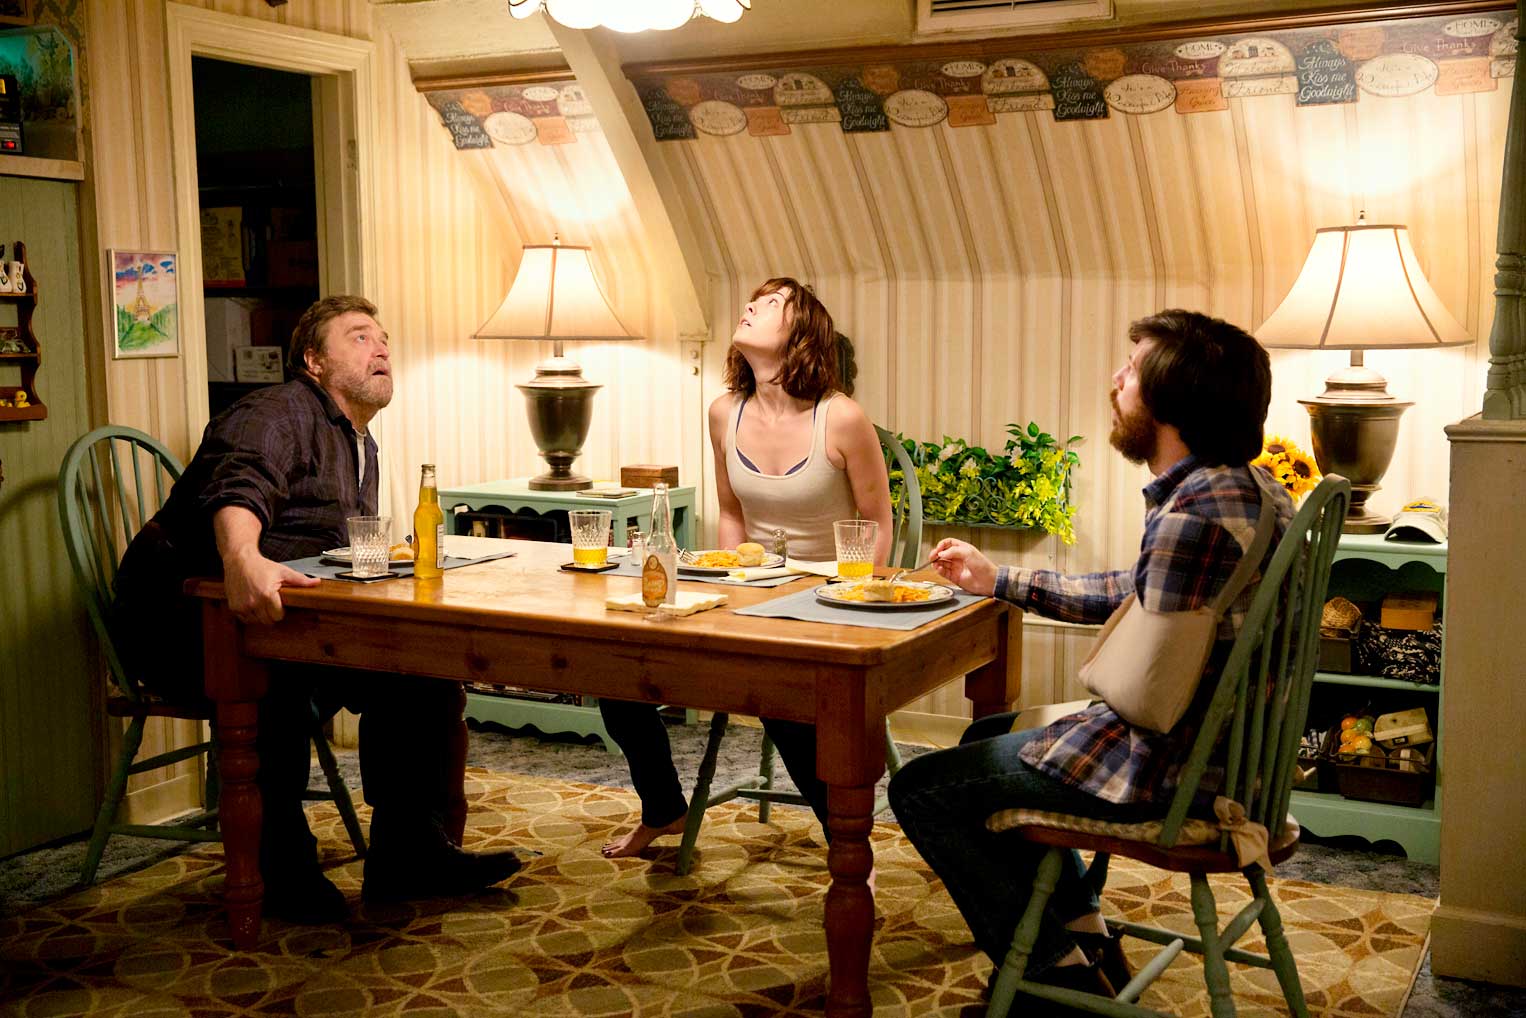 Nonsequel 10 Cloverfield Lane builds buzz with a thrilling score (Paramount)